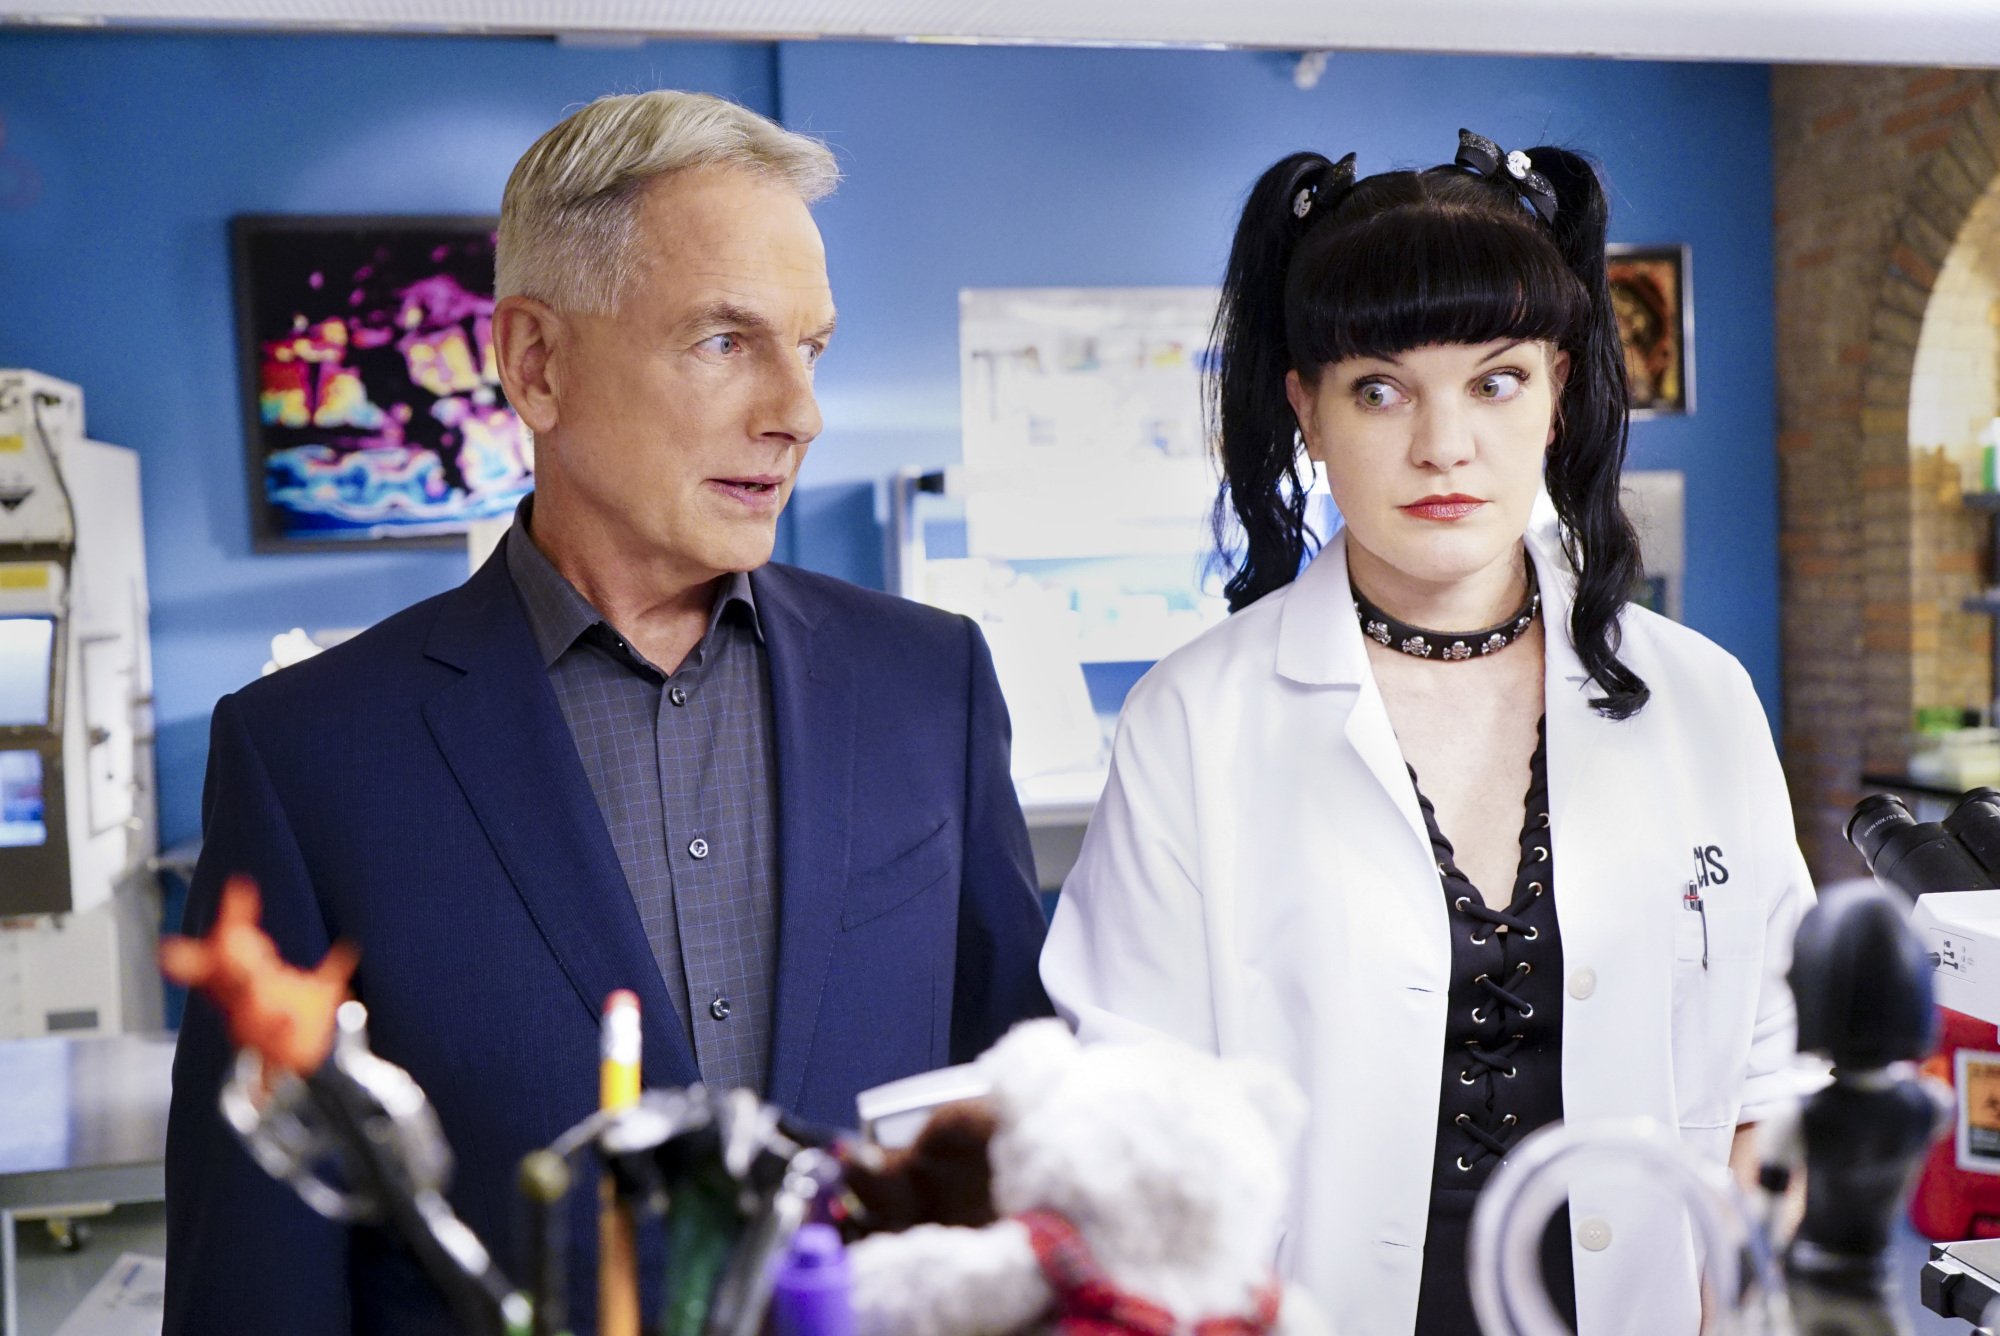 Pauley Perrette als Abby und Mark Harmon als Agent Gibbs in "NCIS". | Quelle: Getty Images